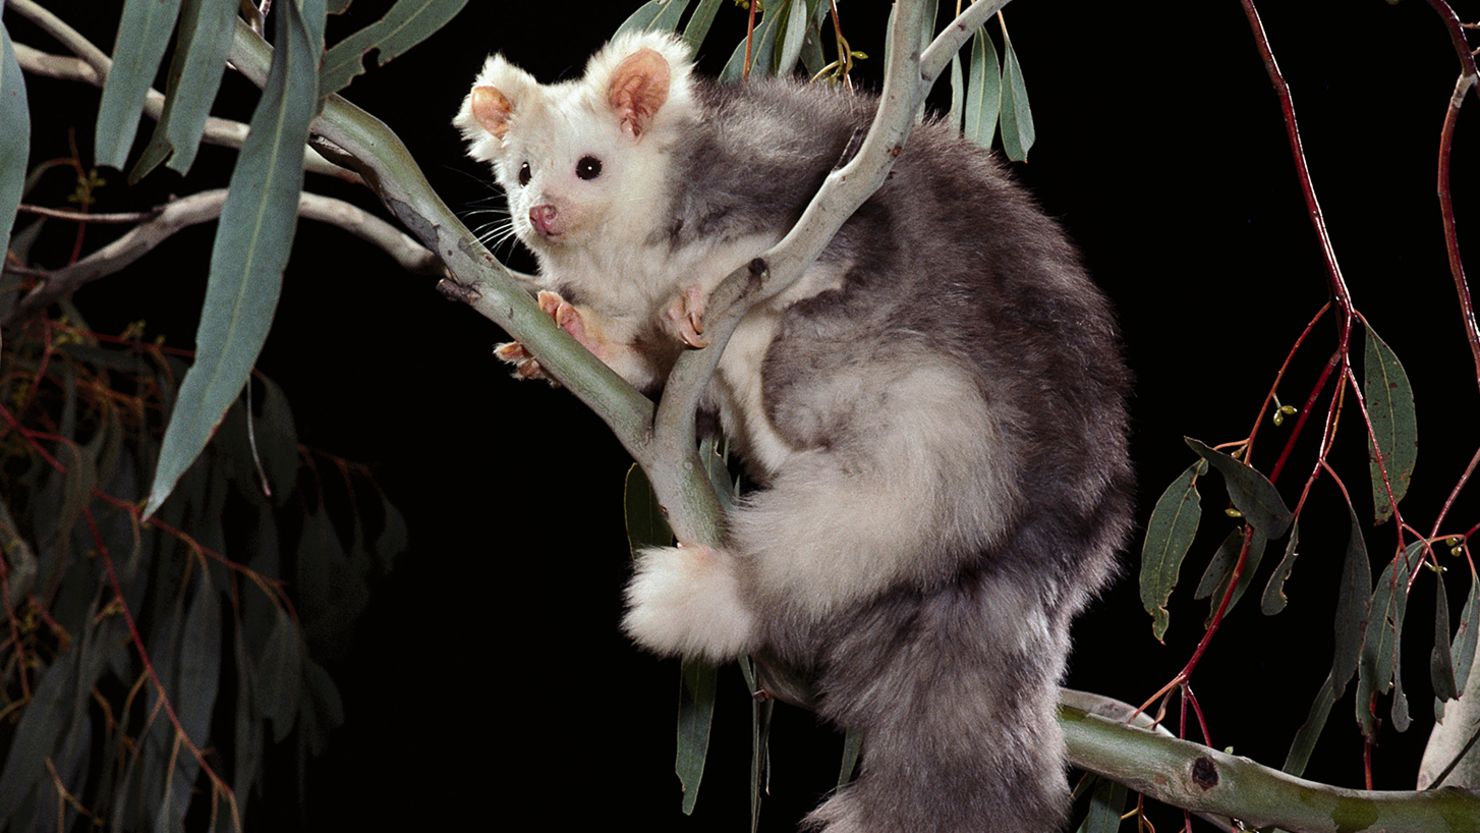 Scientists discover two new marsupial species in Australia